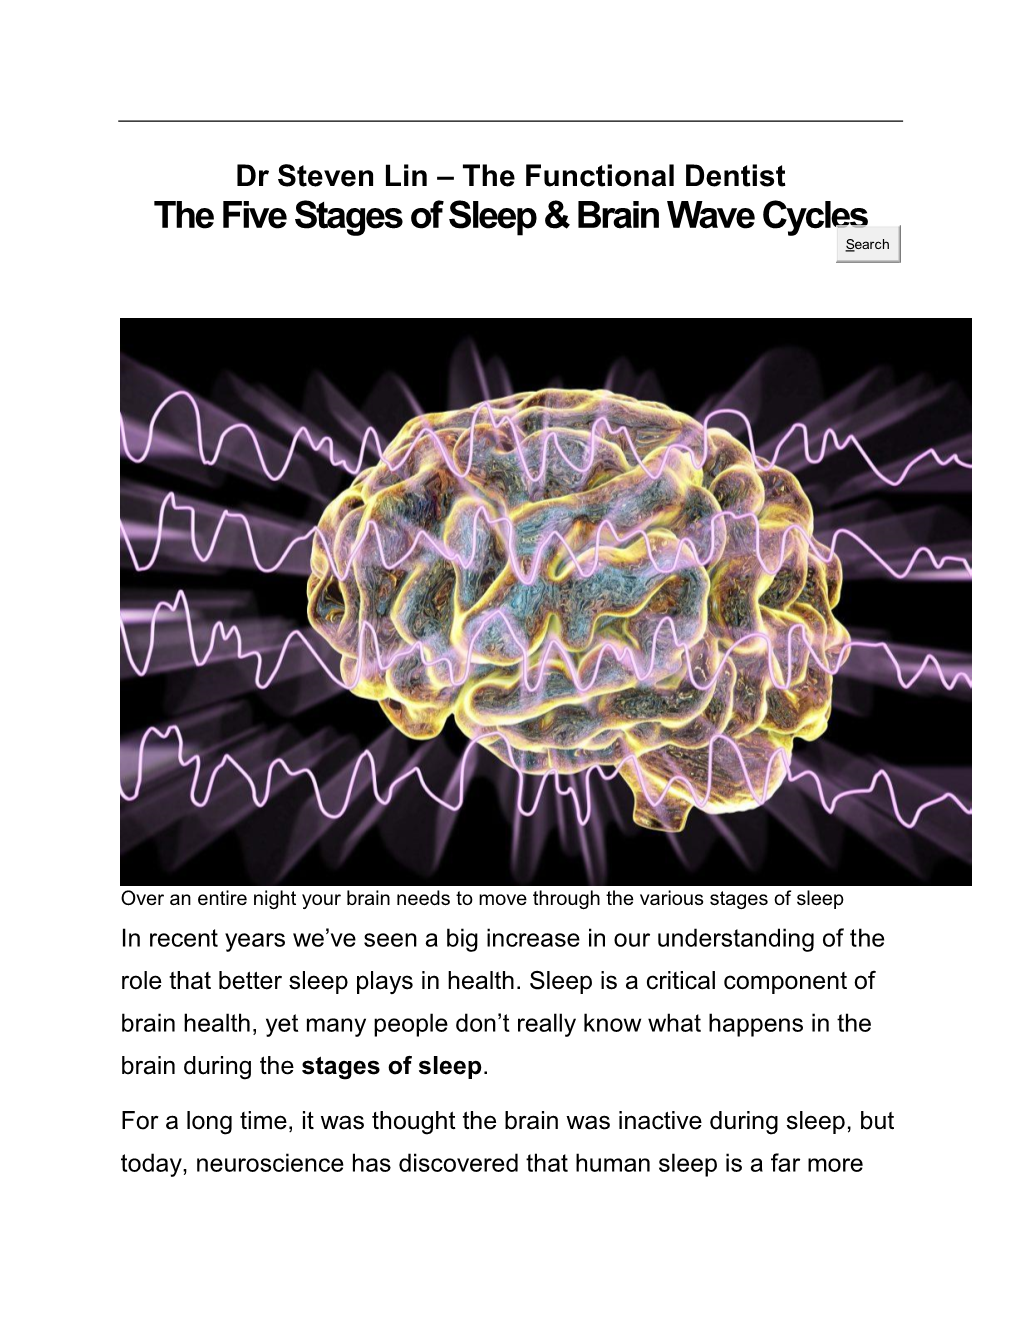 The Five Stages of Sleep & Brain Wave Cycles